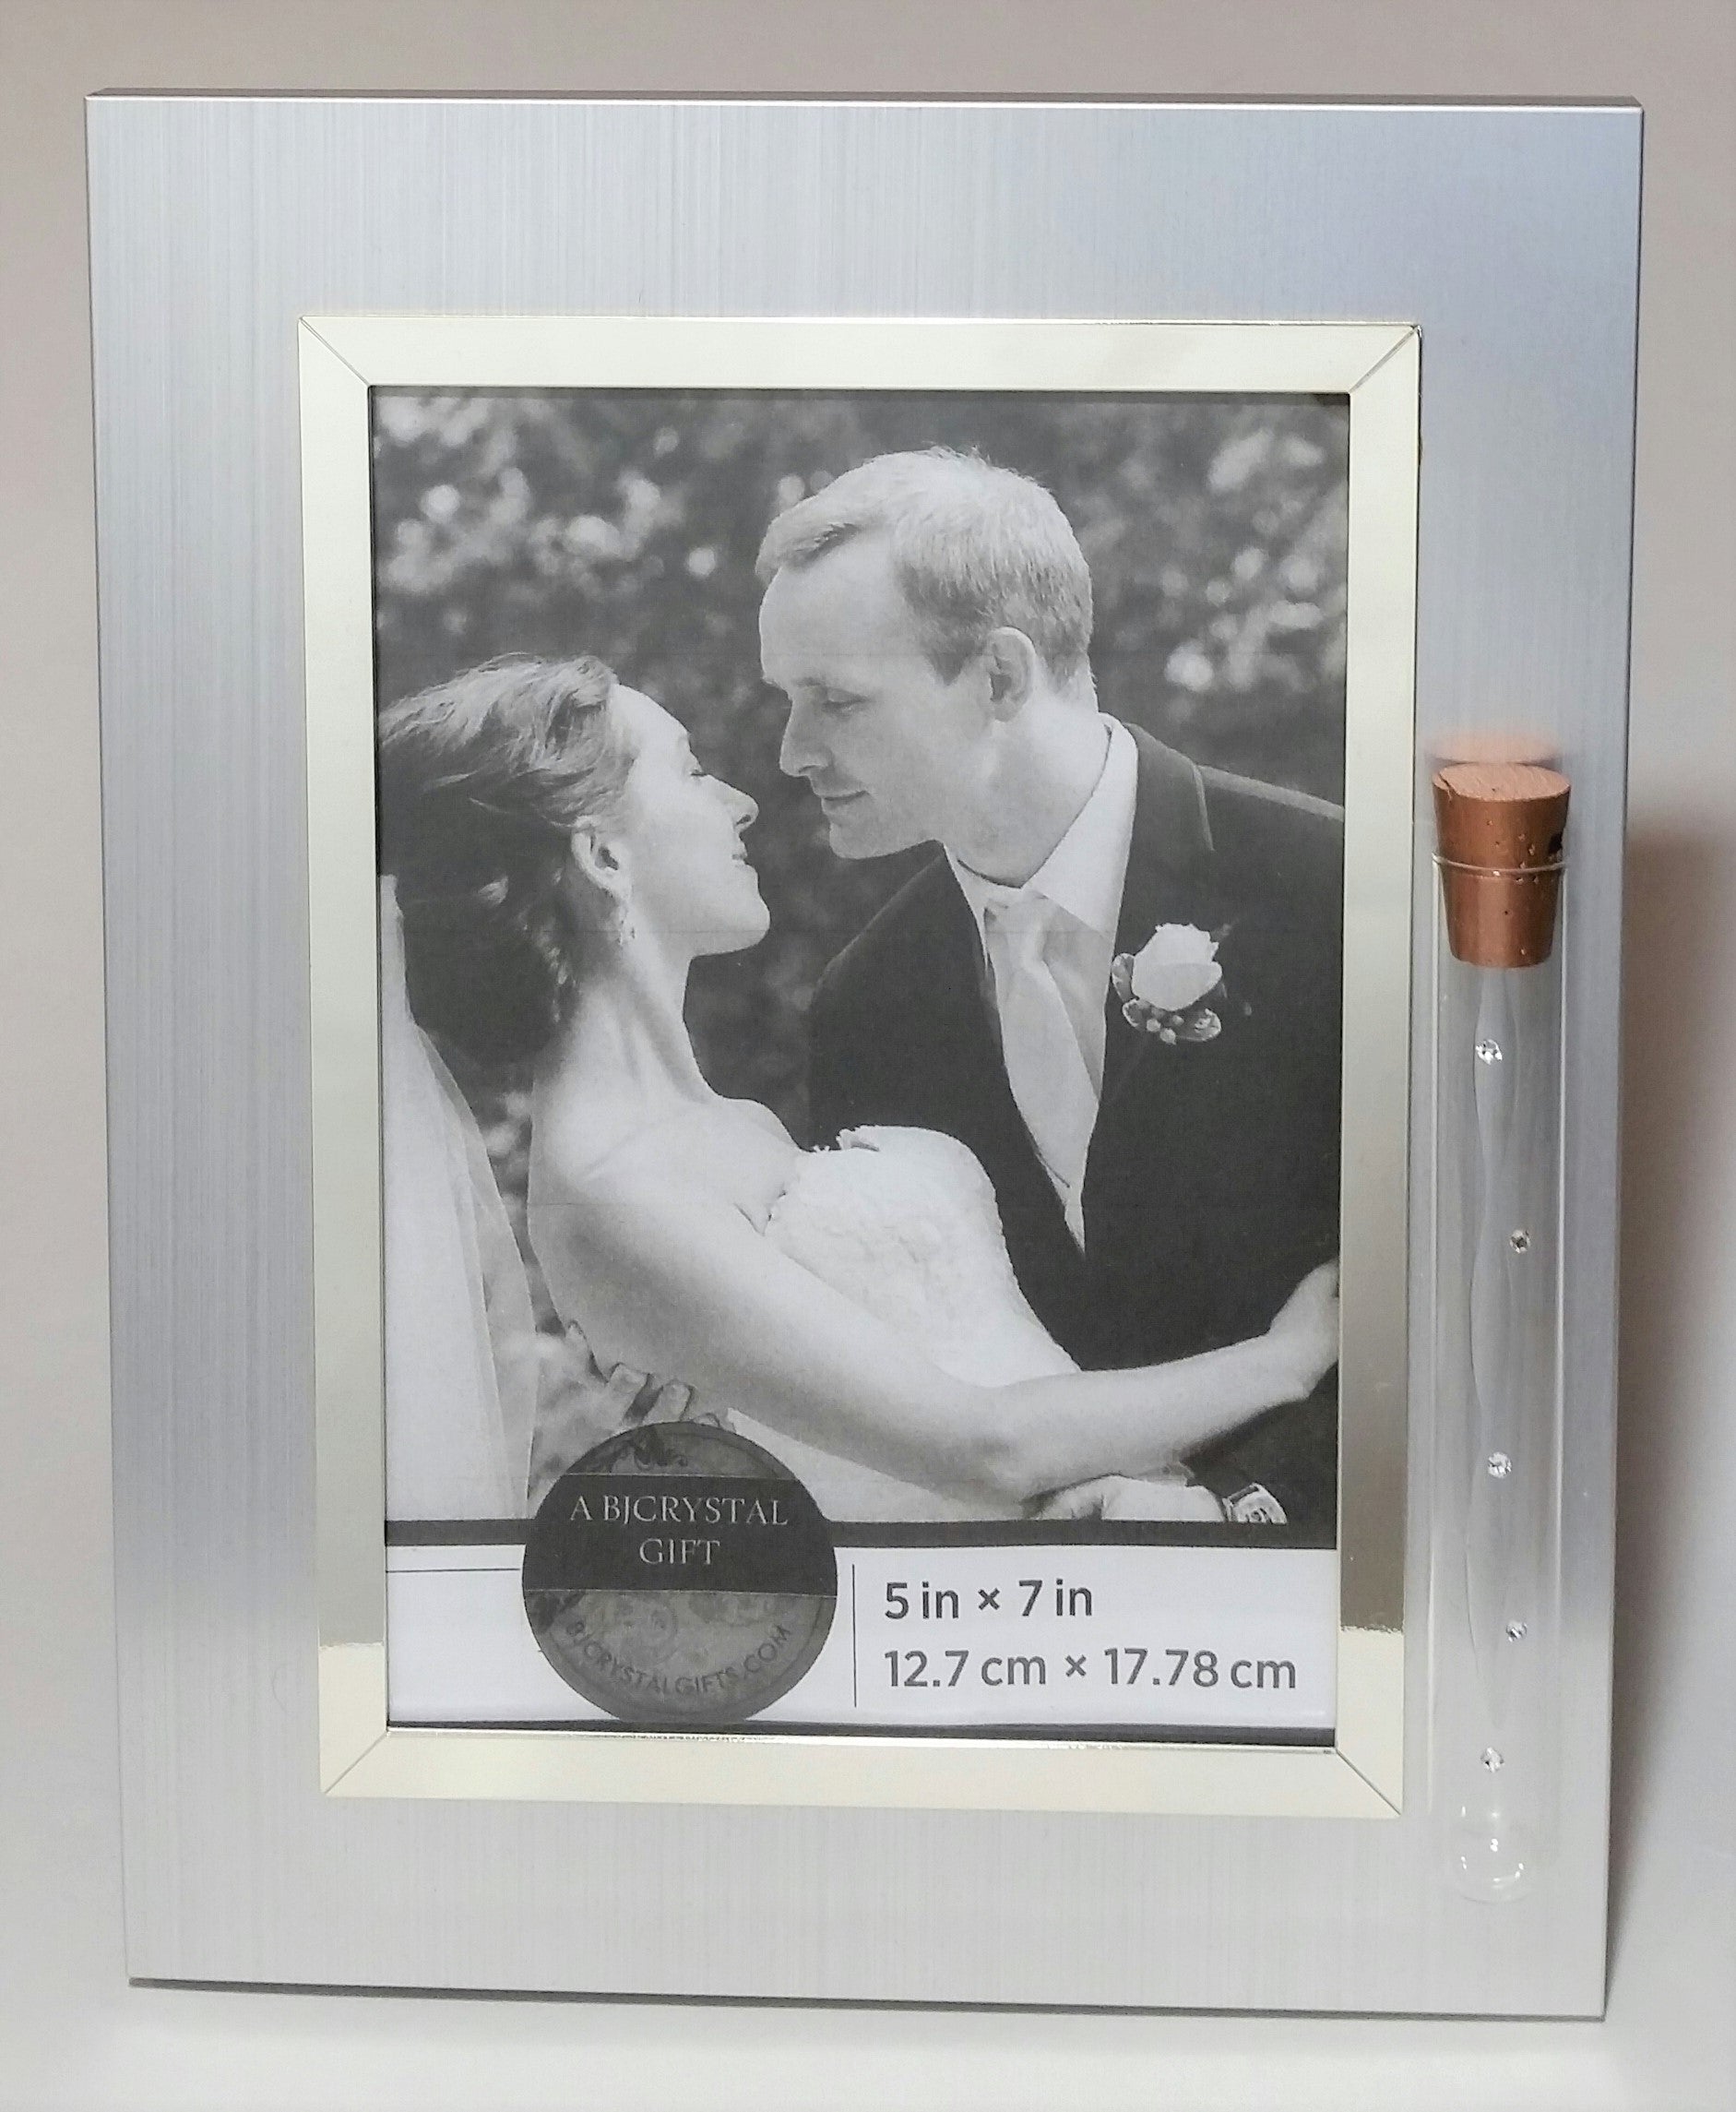 Jewish Wedding Picture Frame - Jewish Engagement Gift - 5x7 Picture - Brush Silver Color with Reflective Silvertone Trim